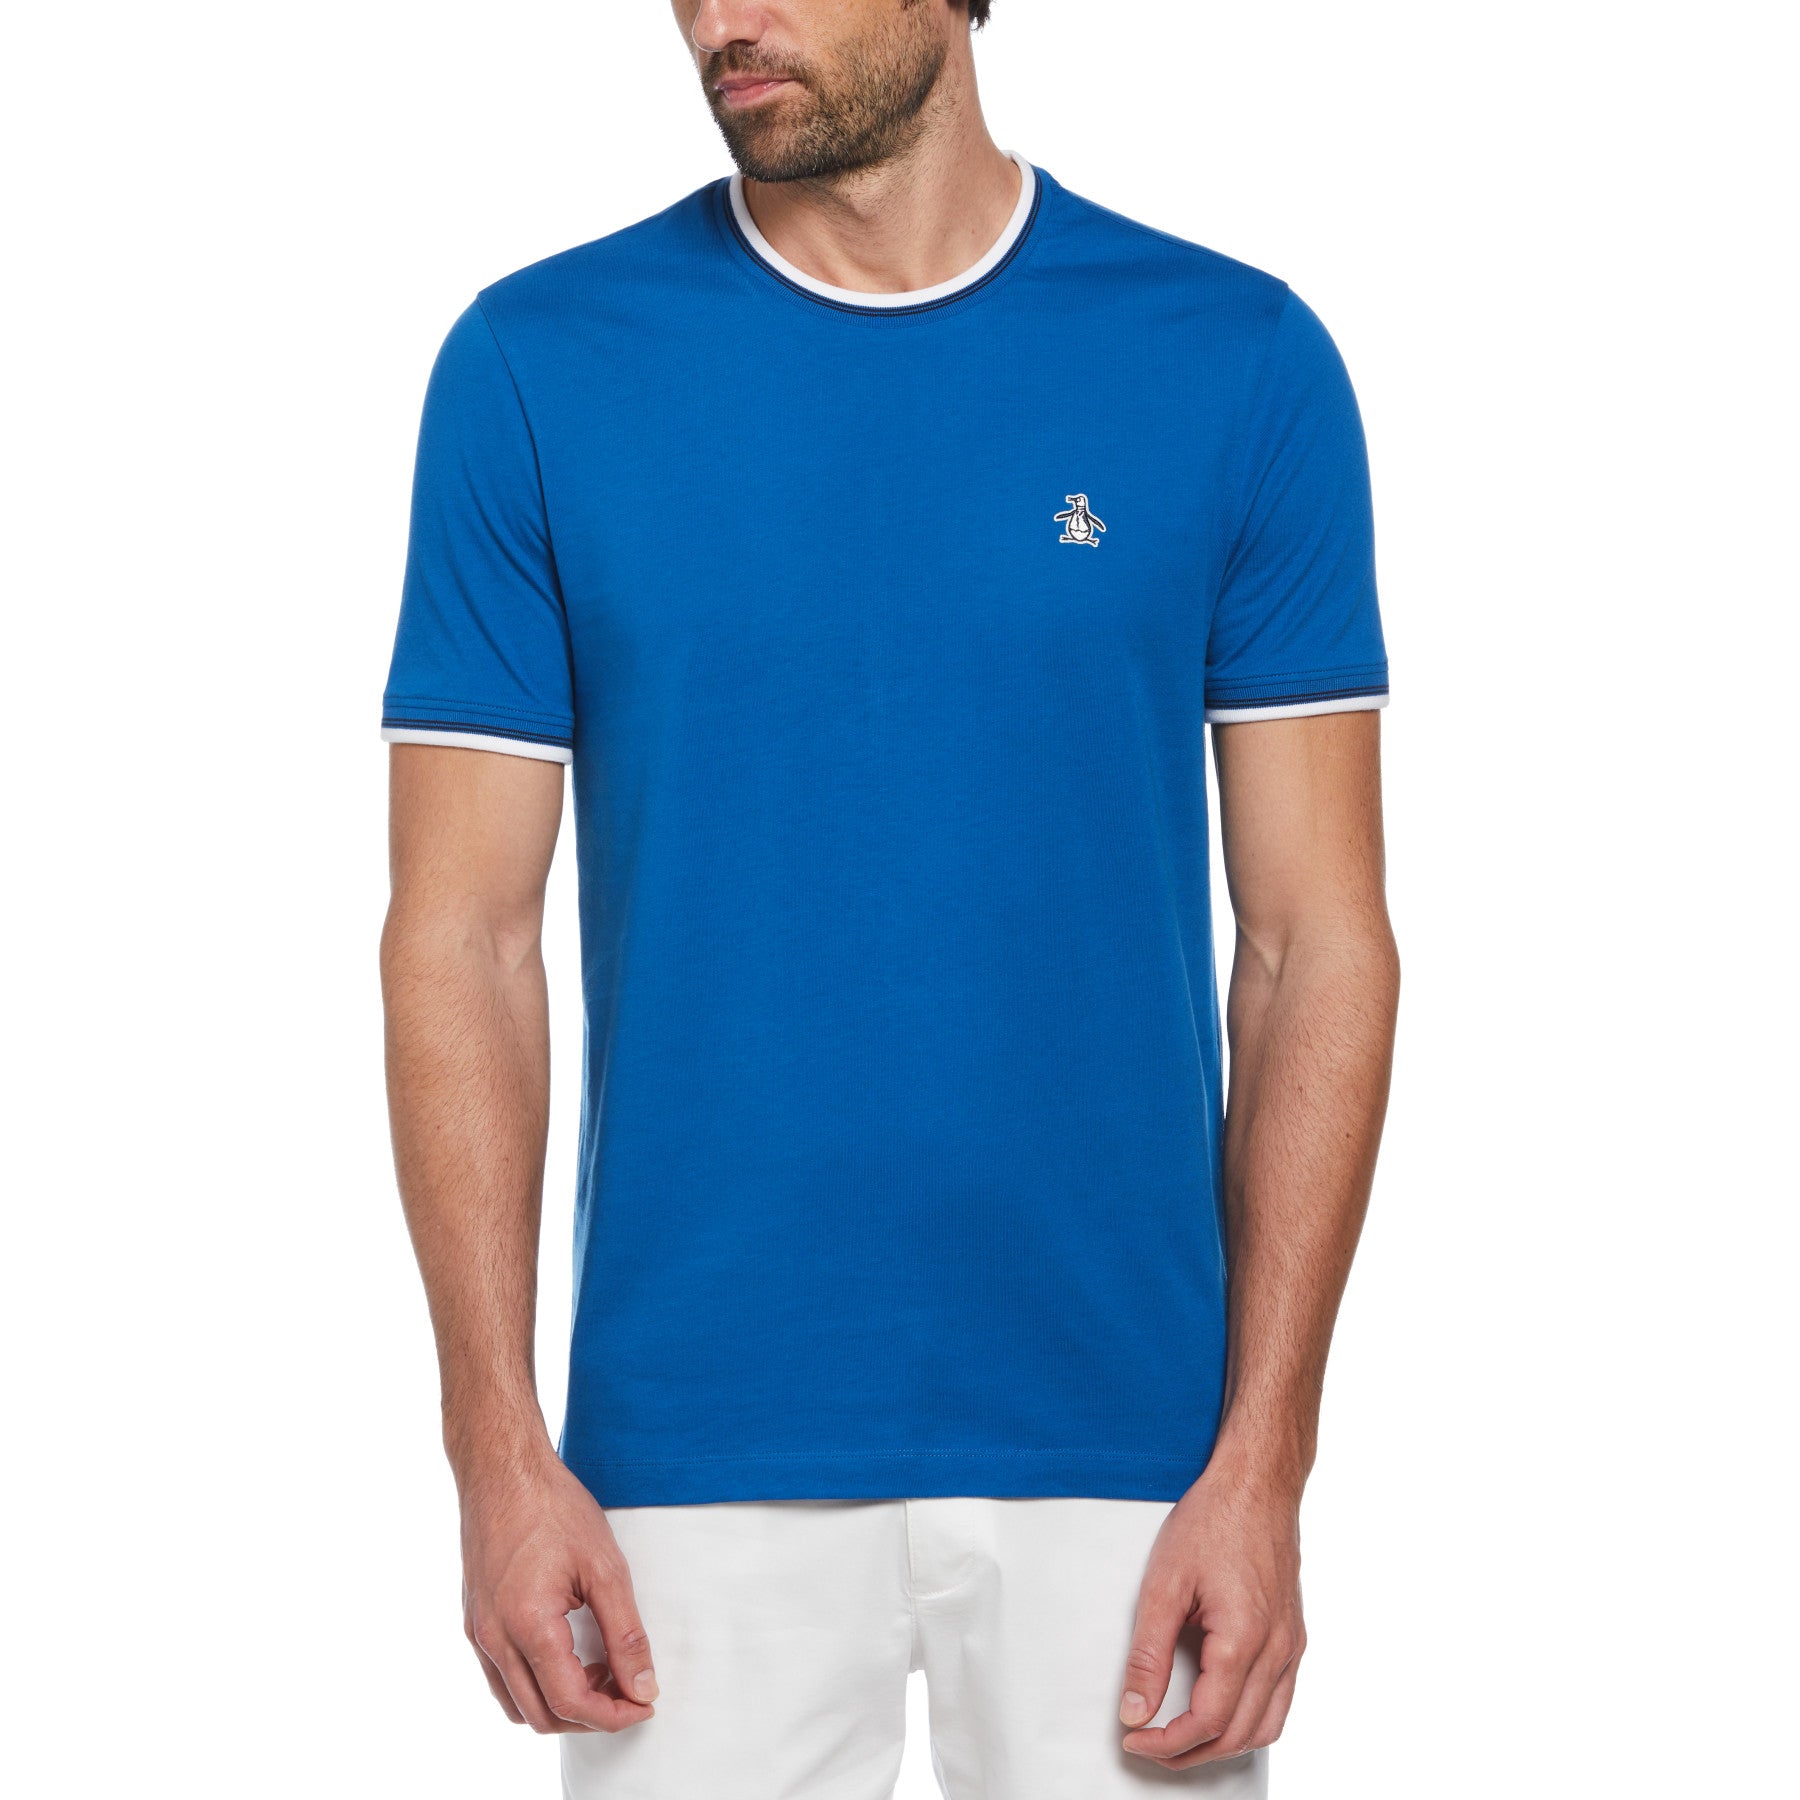 View Sticker Pete Ringer TShirt In Classic Blue information